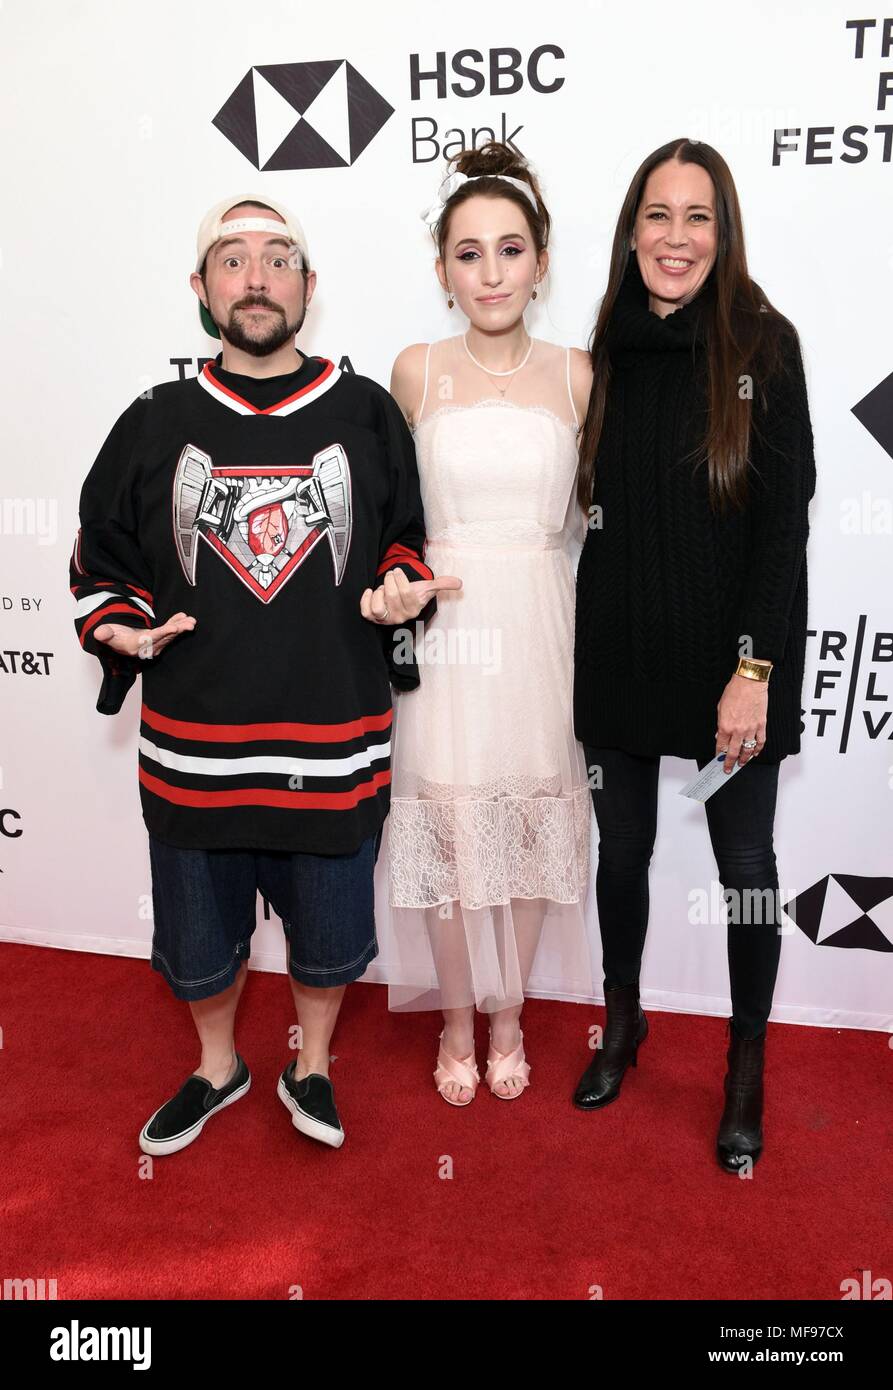 New York, NY, USA. 24th Apr, 2018. Kevin Smith, Harley Quinn Smith, Jennifer Schwalbach Smith at arrivals for ALL THESE SMALL MOMENTS Premiere at the Tribeca Film Festival 2018, School of Visual Arts (SVA) Theatre, New York, NY April 24, 2018. Credit: Derek Storm/Everett Collection/Alamy Live News Stock Photo